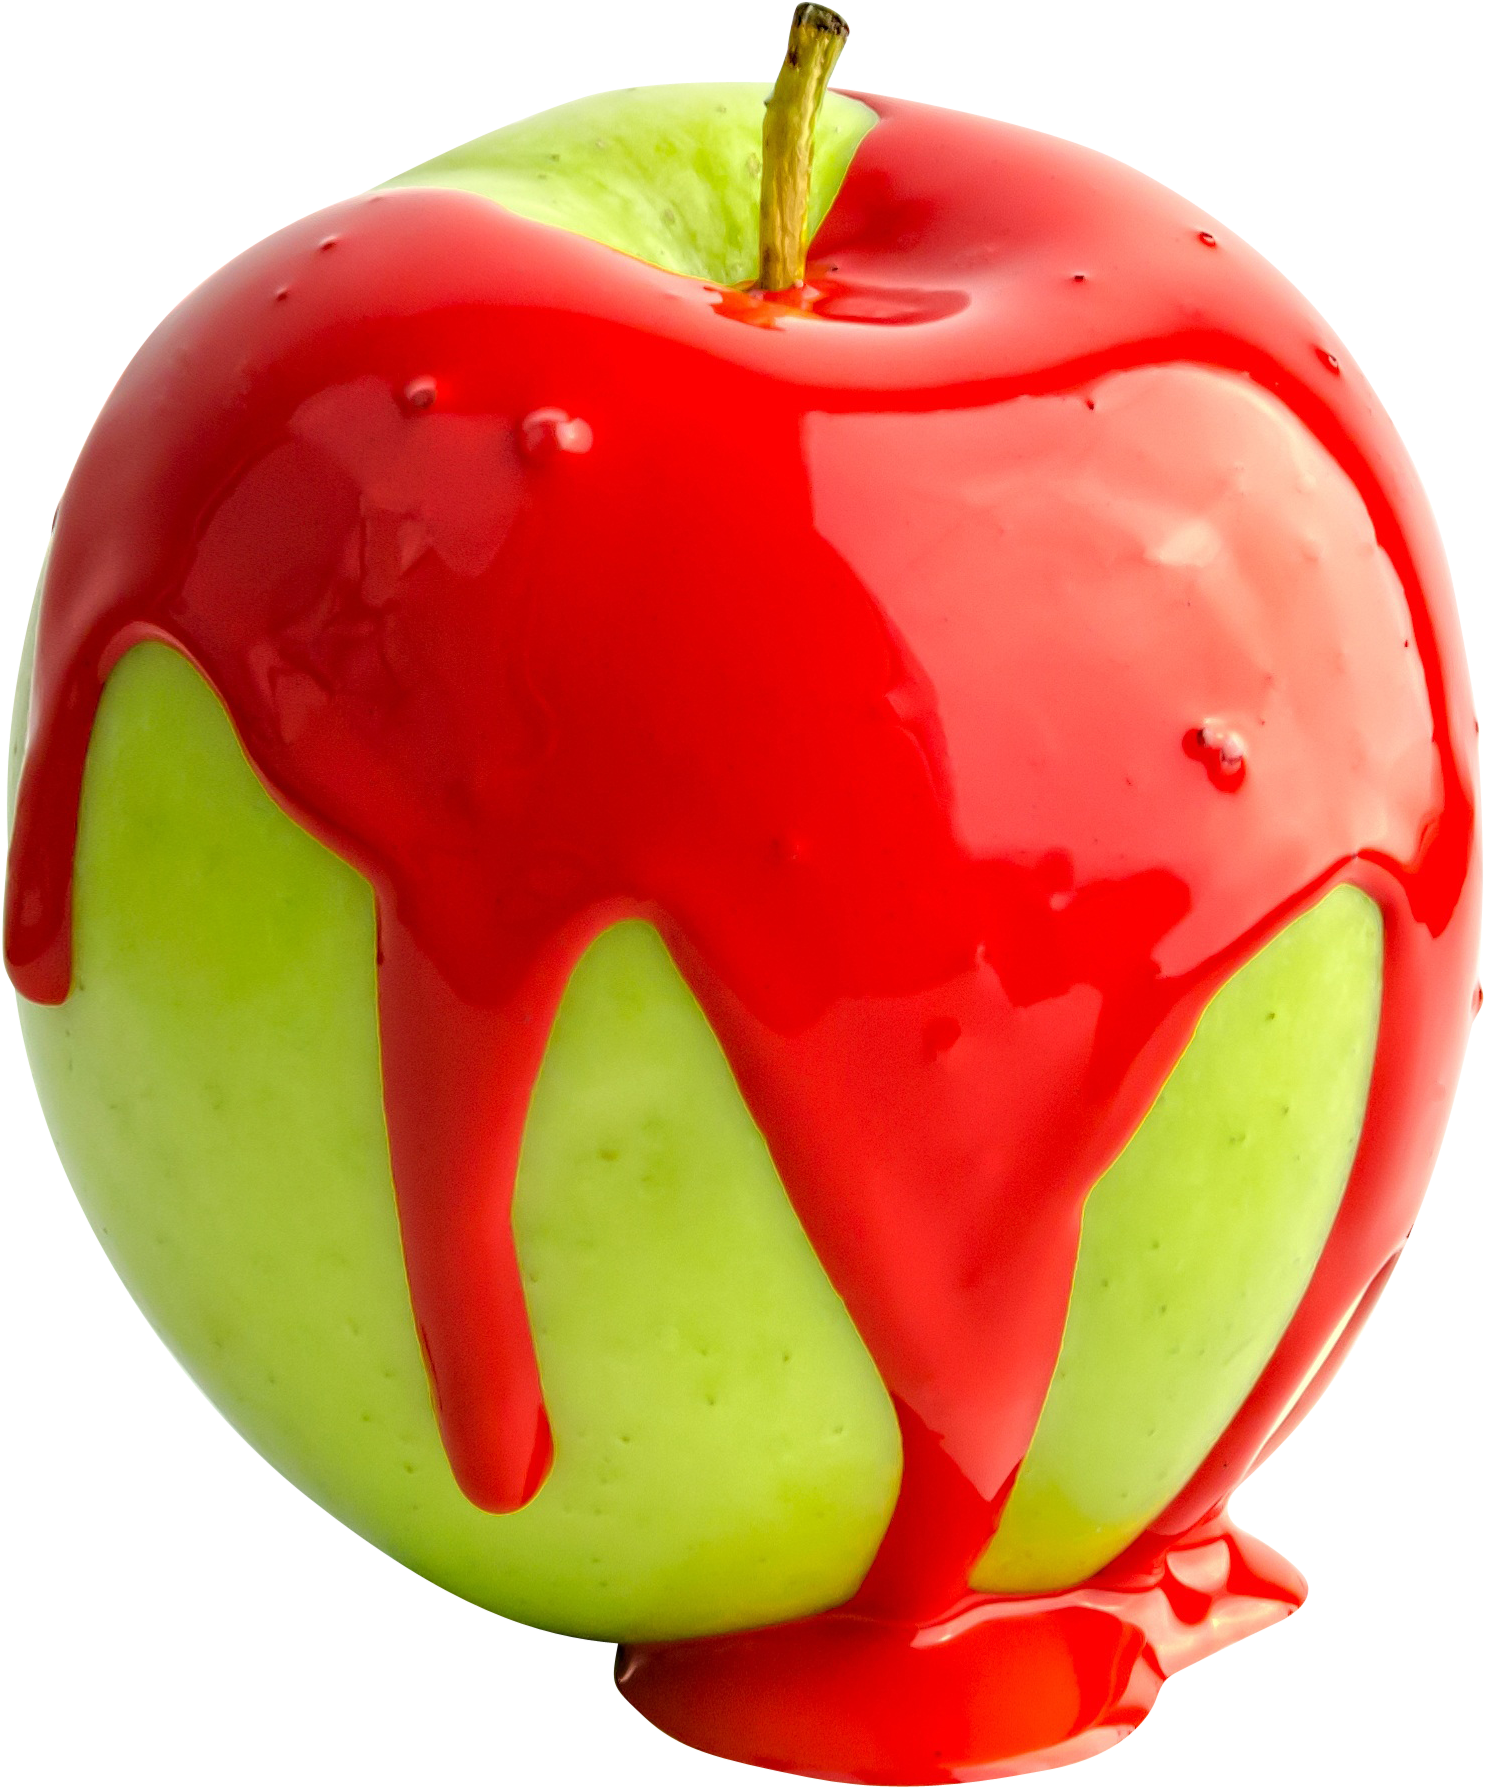 Red Paint On Apple Apple Covered In Paint